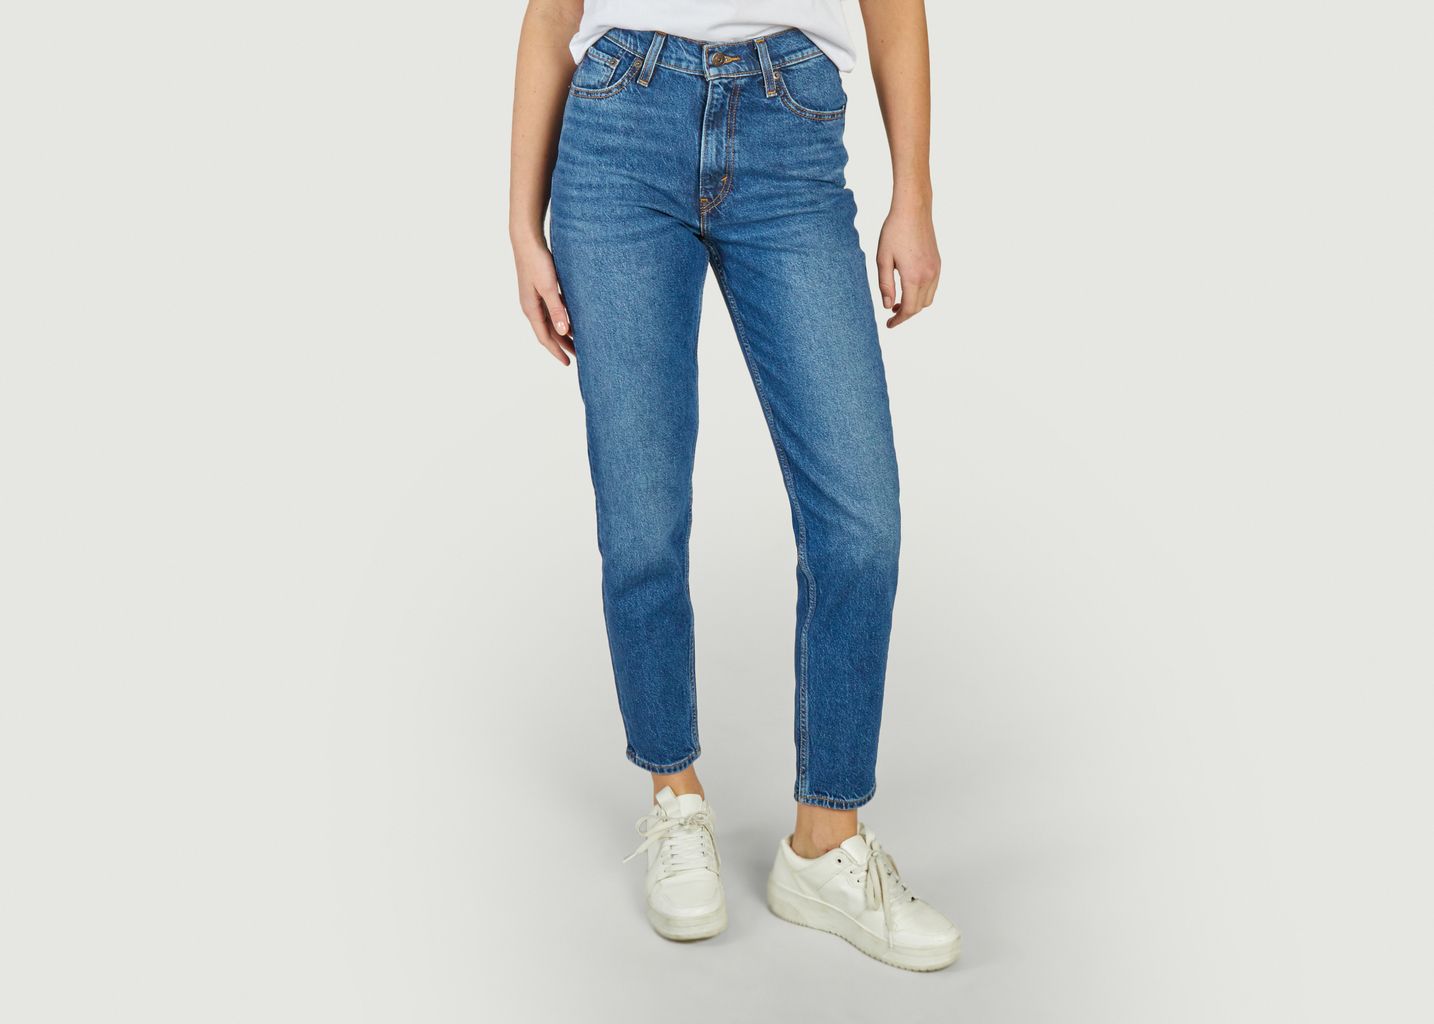 Mom 80's Jeans - Levi's Red Tab